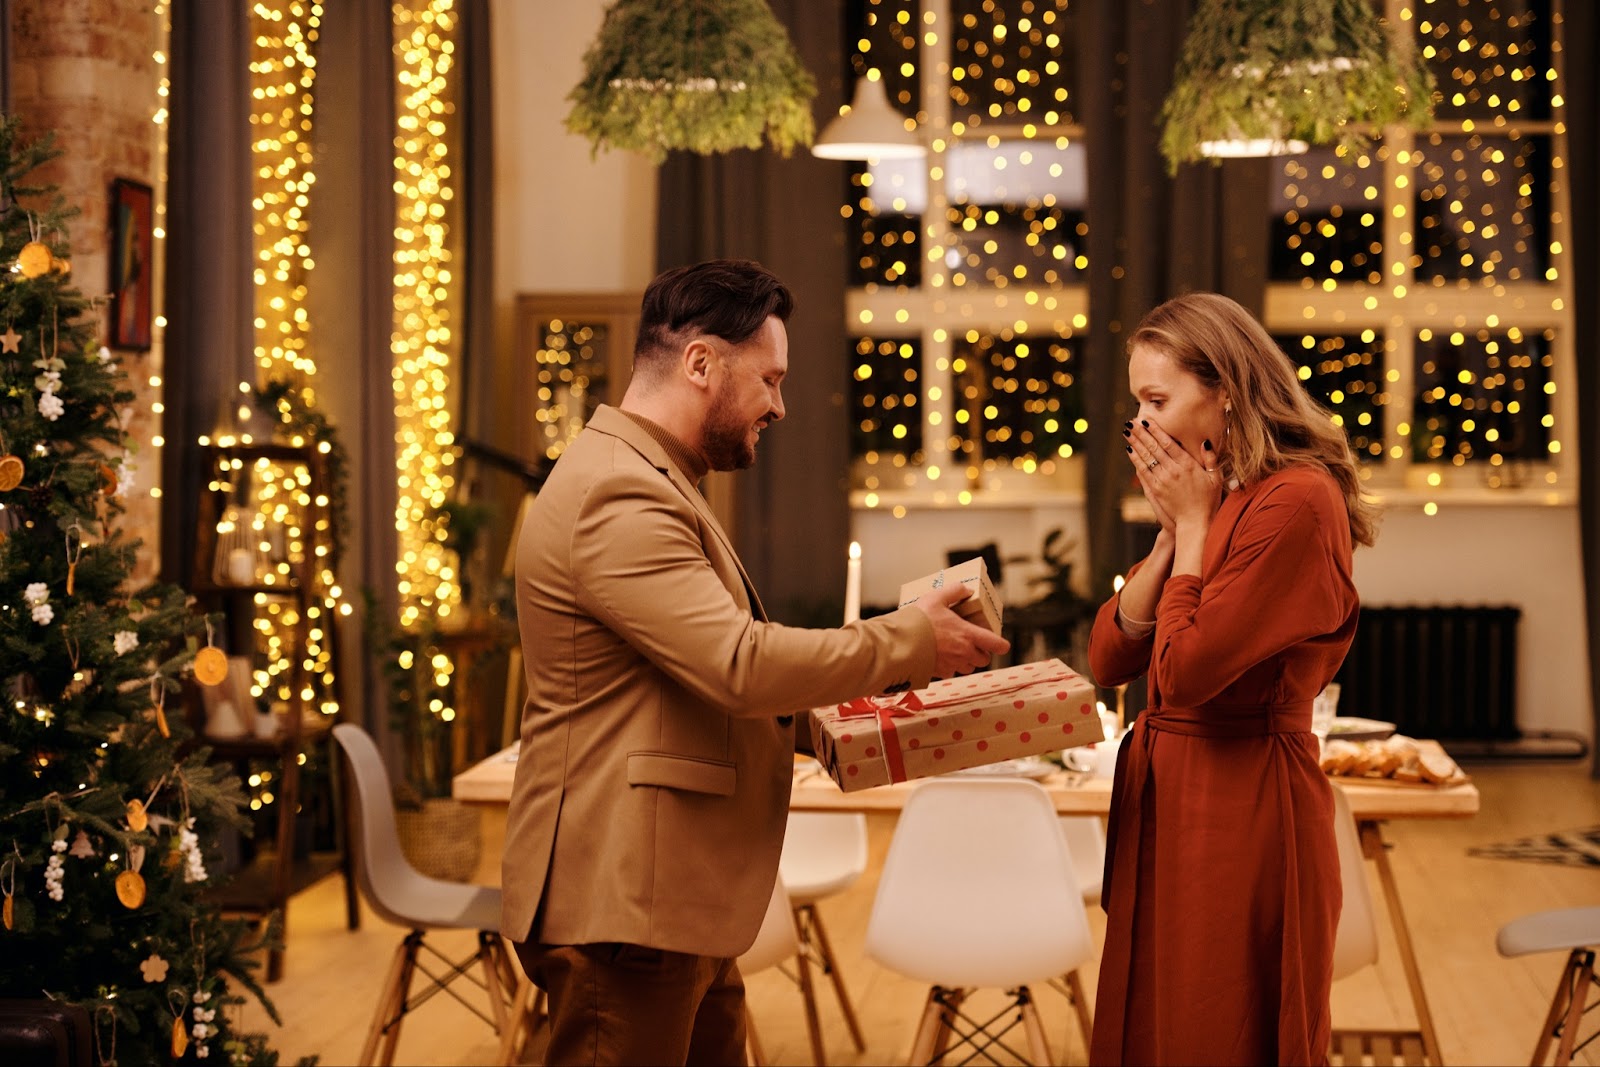 The holiday season is a time to get closer with your family and friends. It's also a time for you to get more intimate with your significant other! Here are five tips on how you can make this Christmas the best one yet.